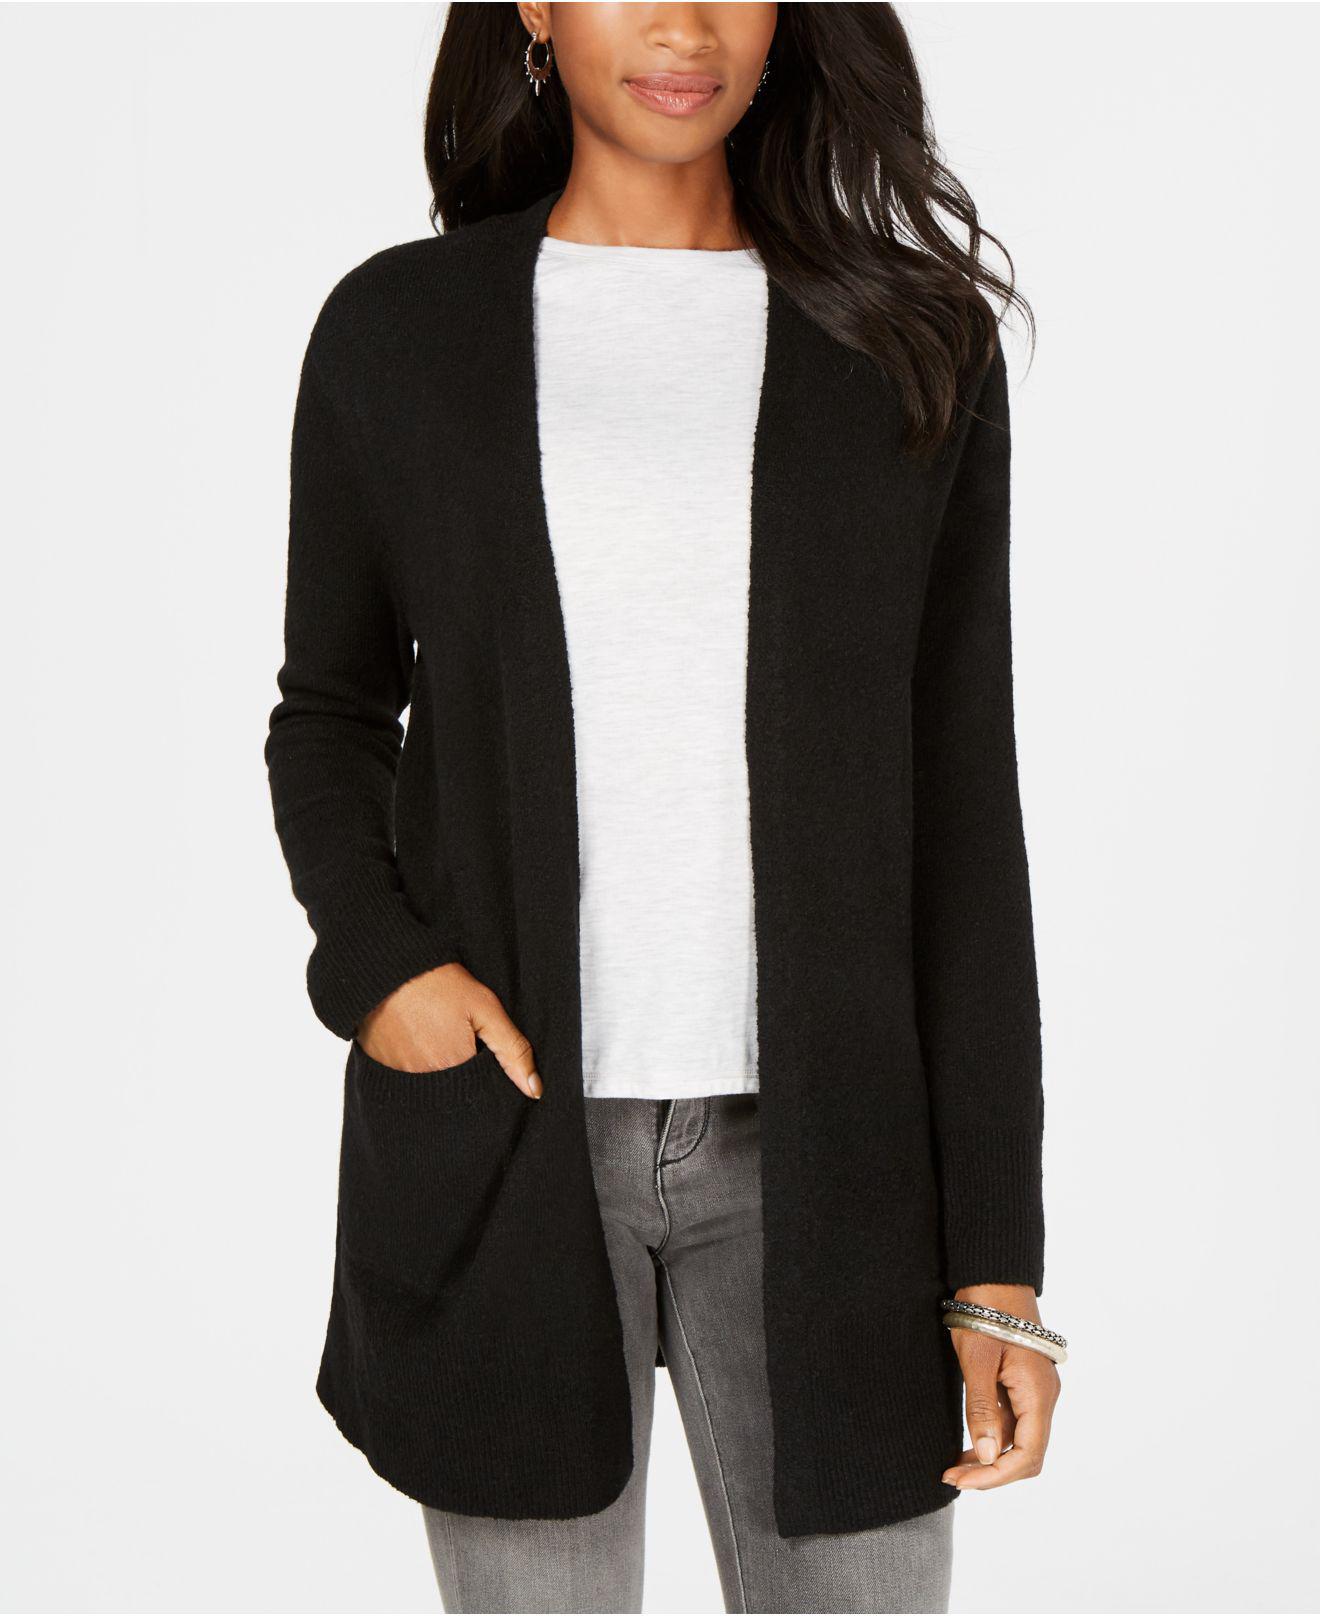 Lyst Style  Co Petite Open front Cardigan Sweater  